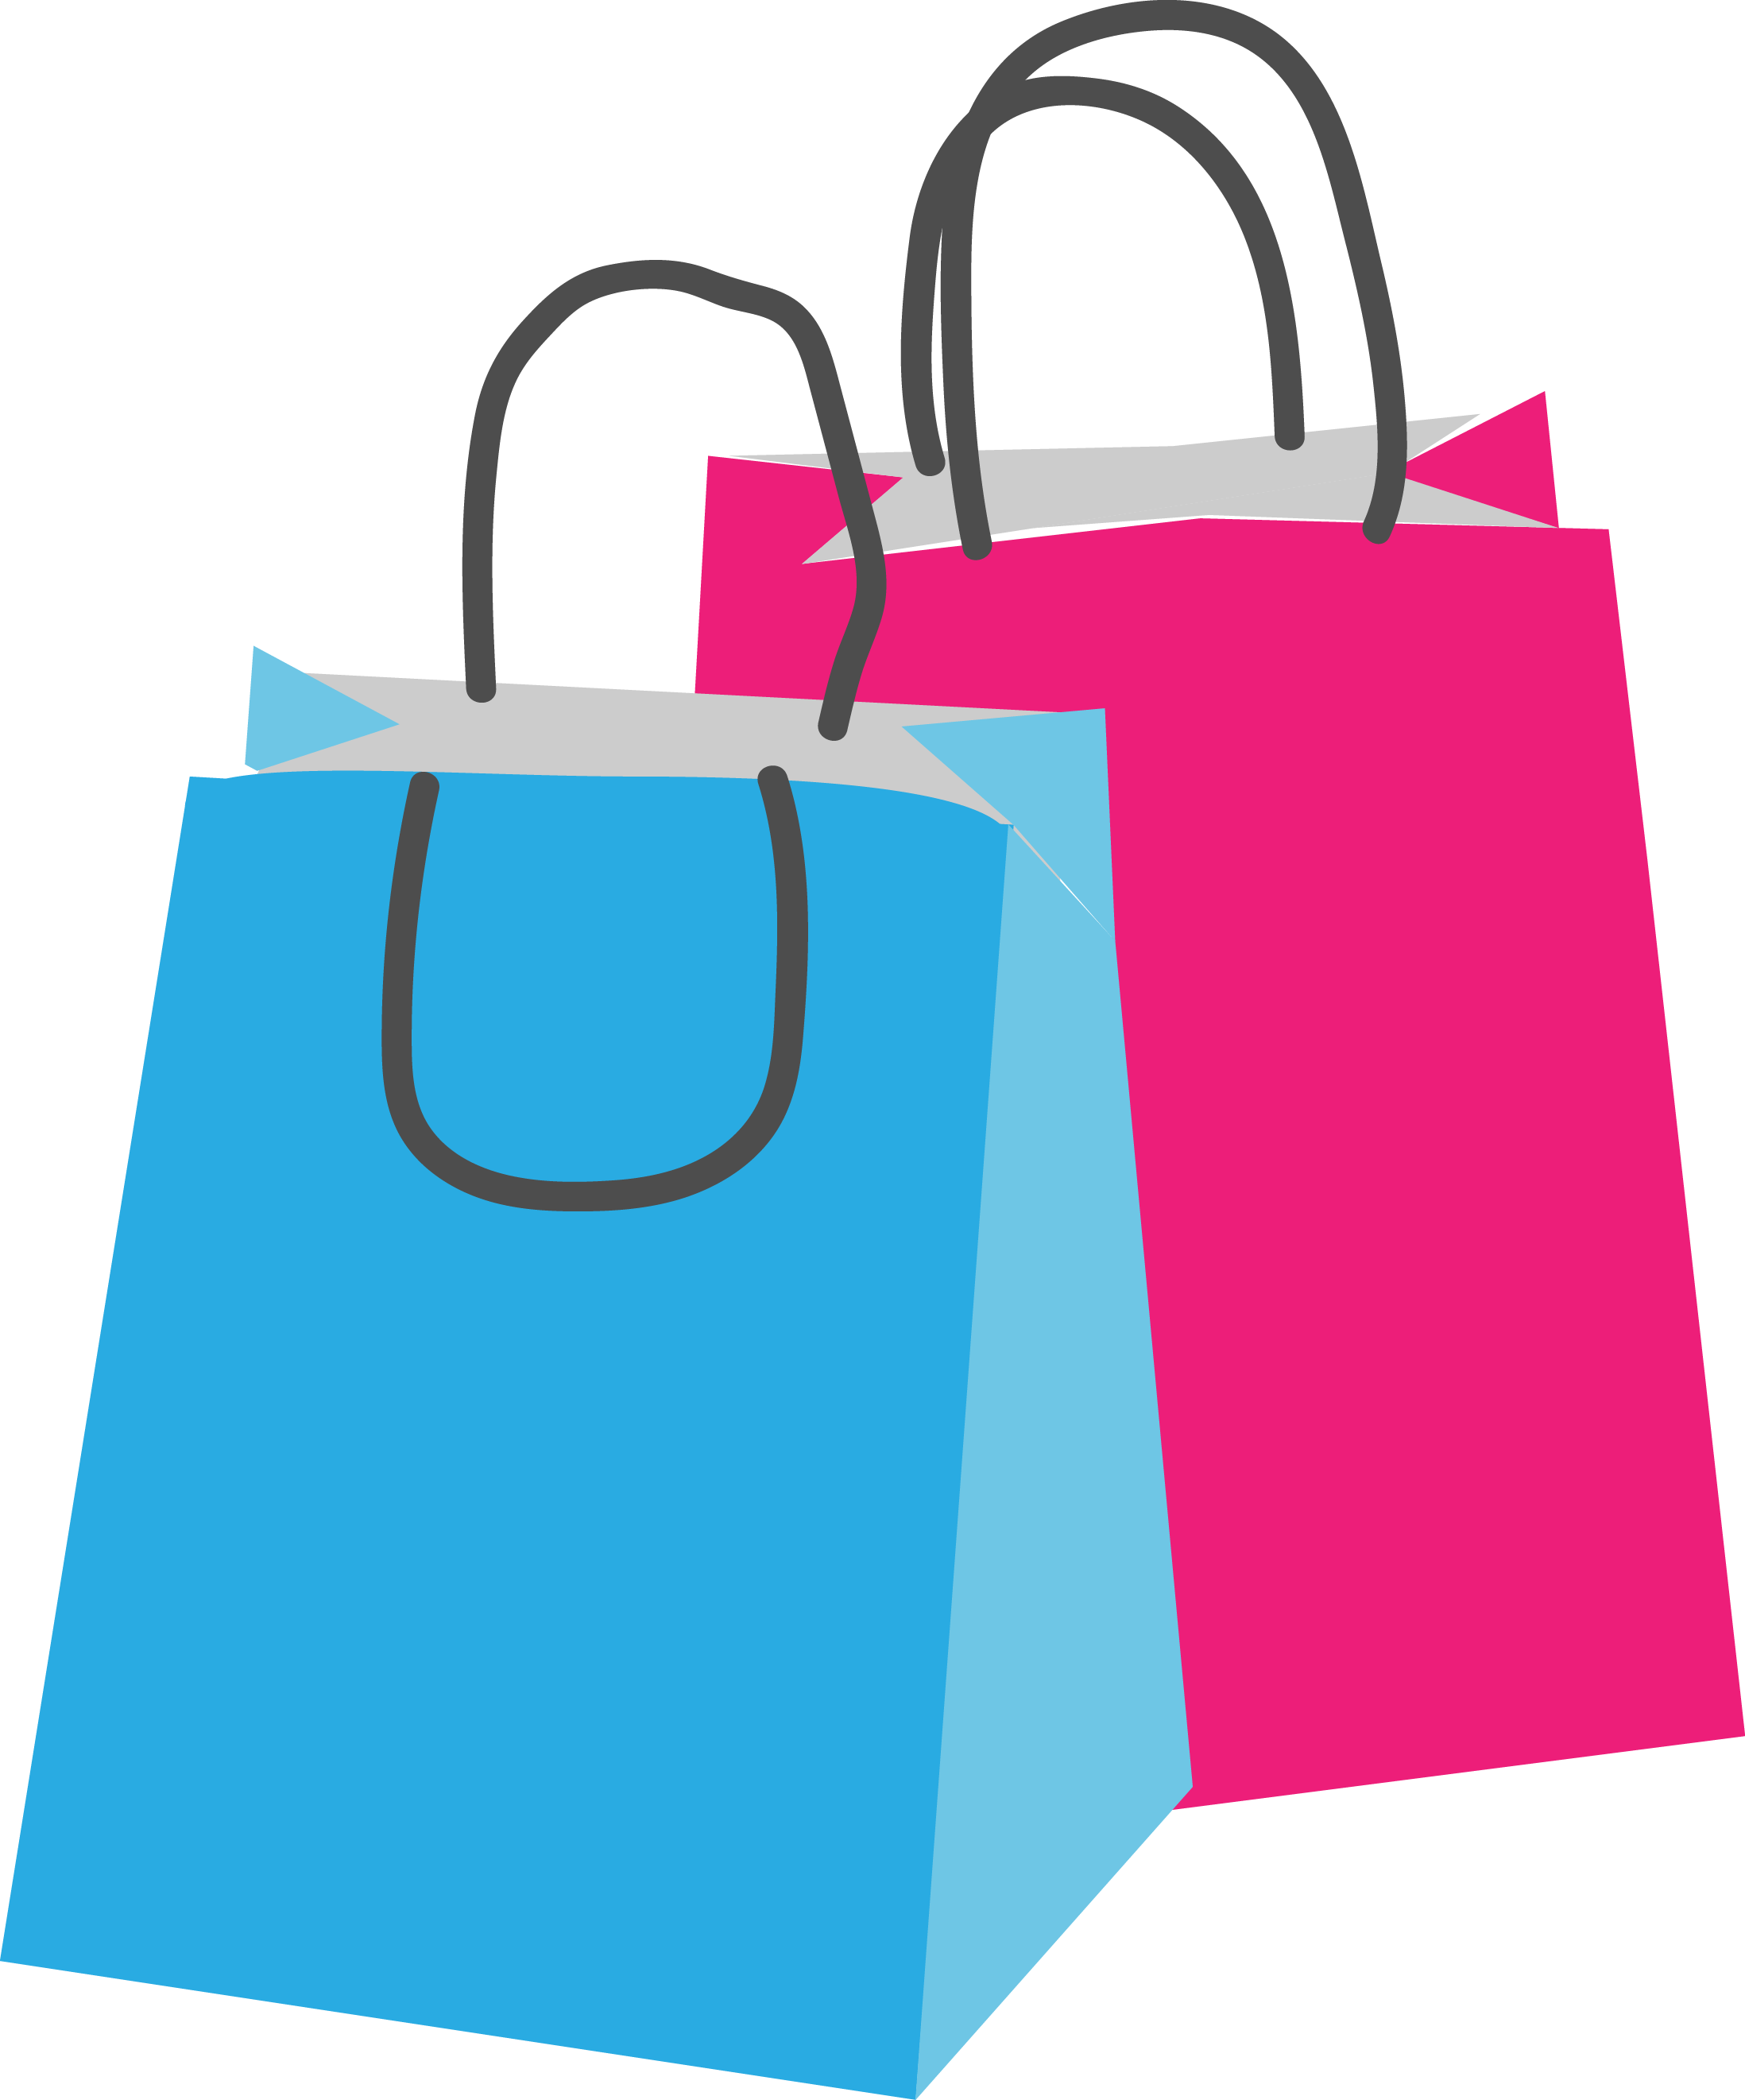 Download Bag Shopping Colorful HD Image Free HQ PNG Image in different ...